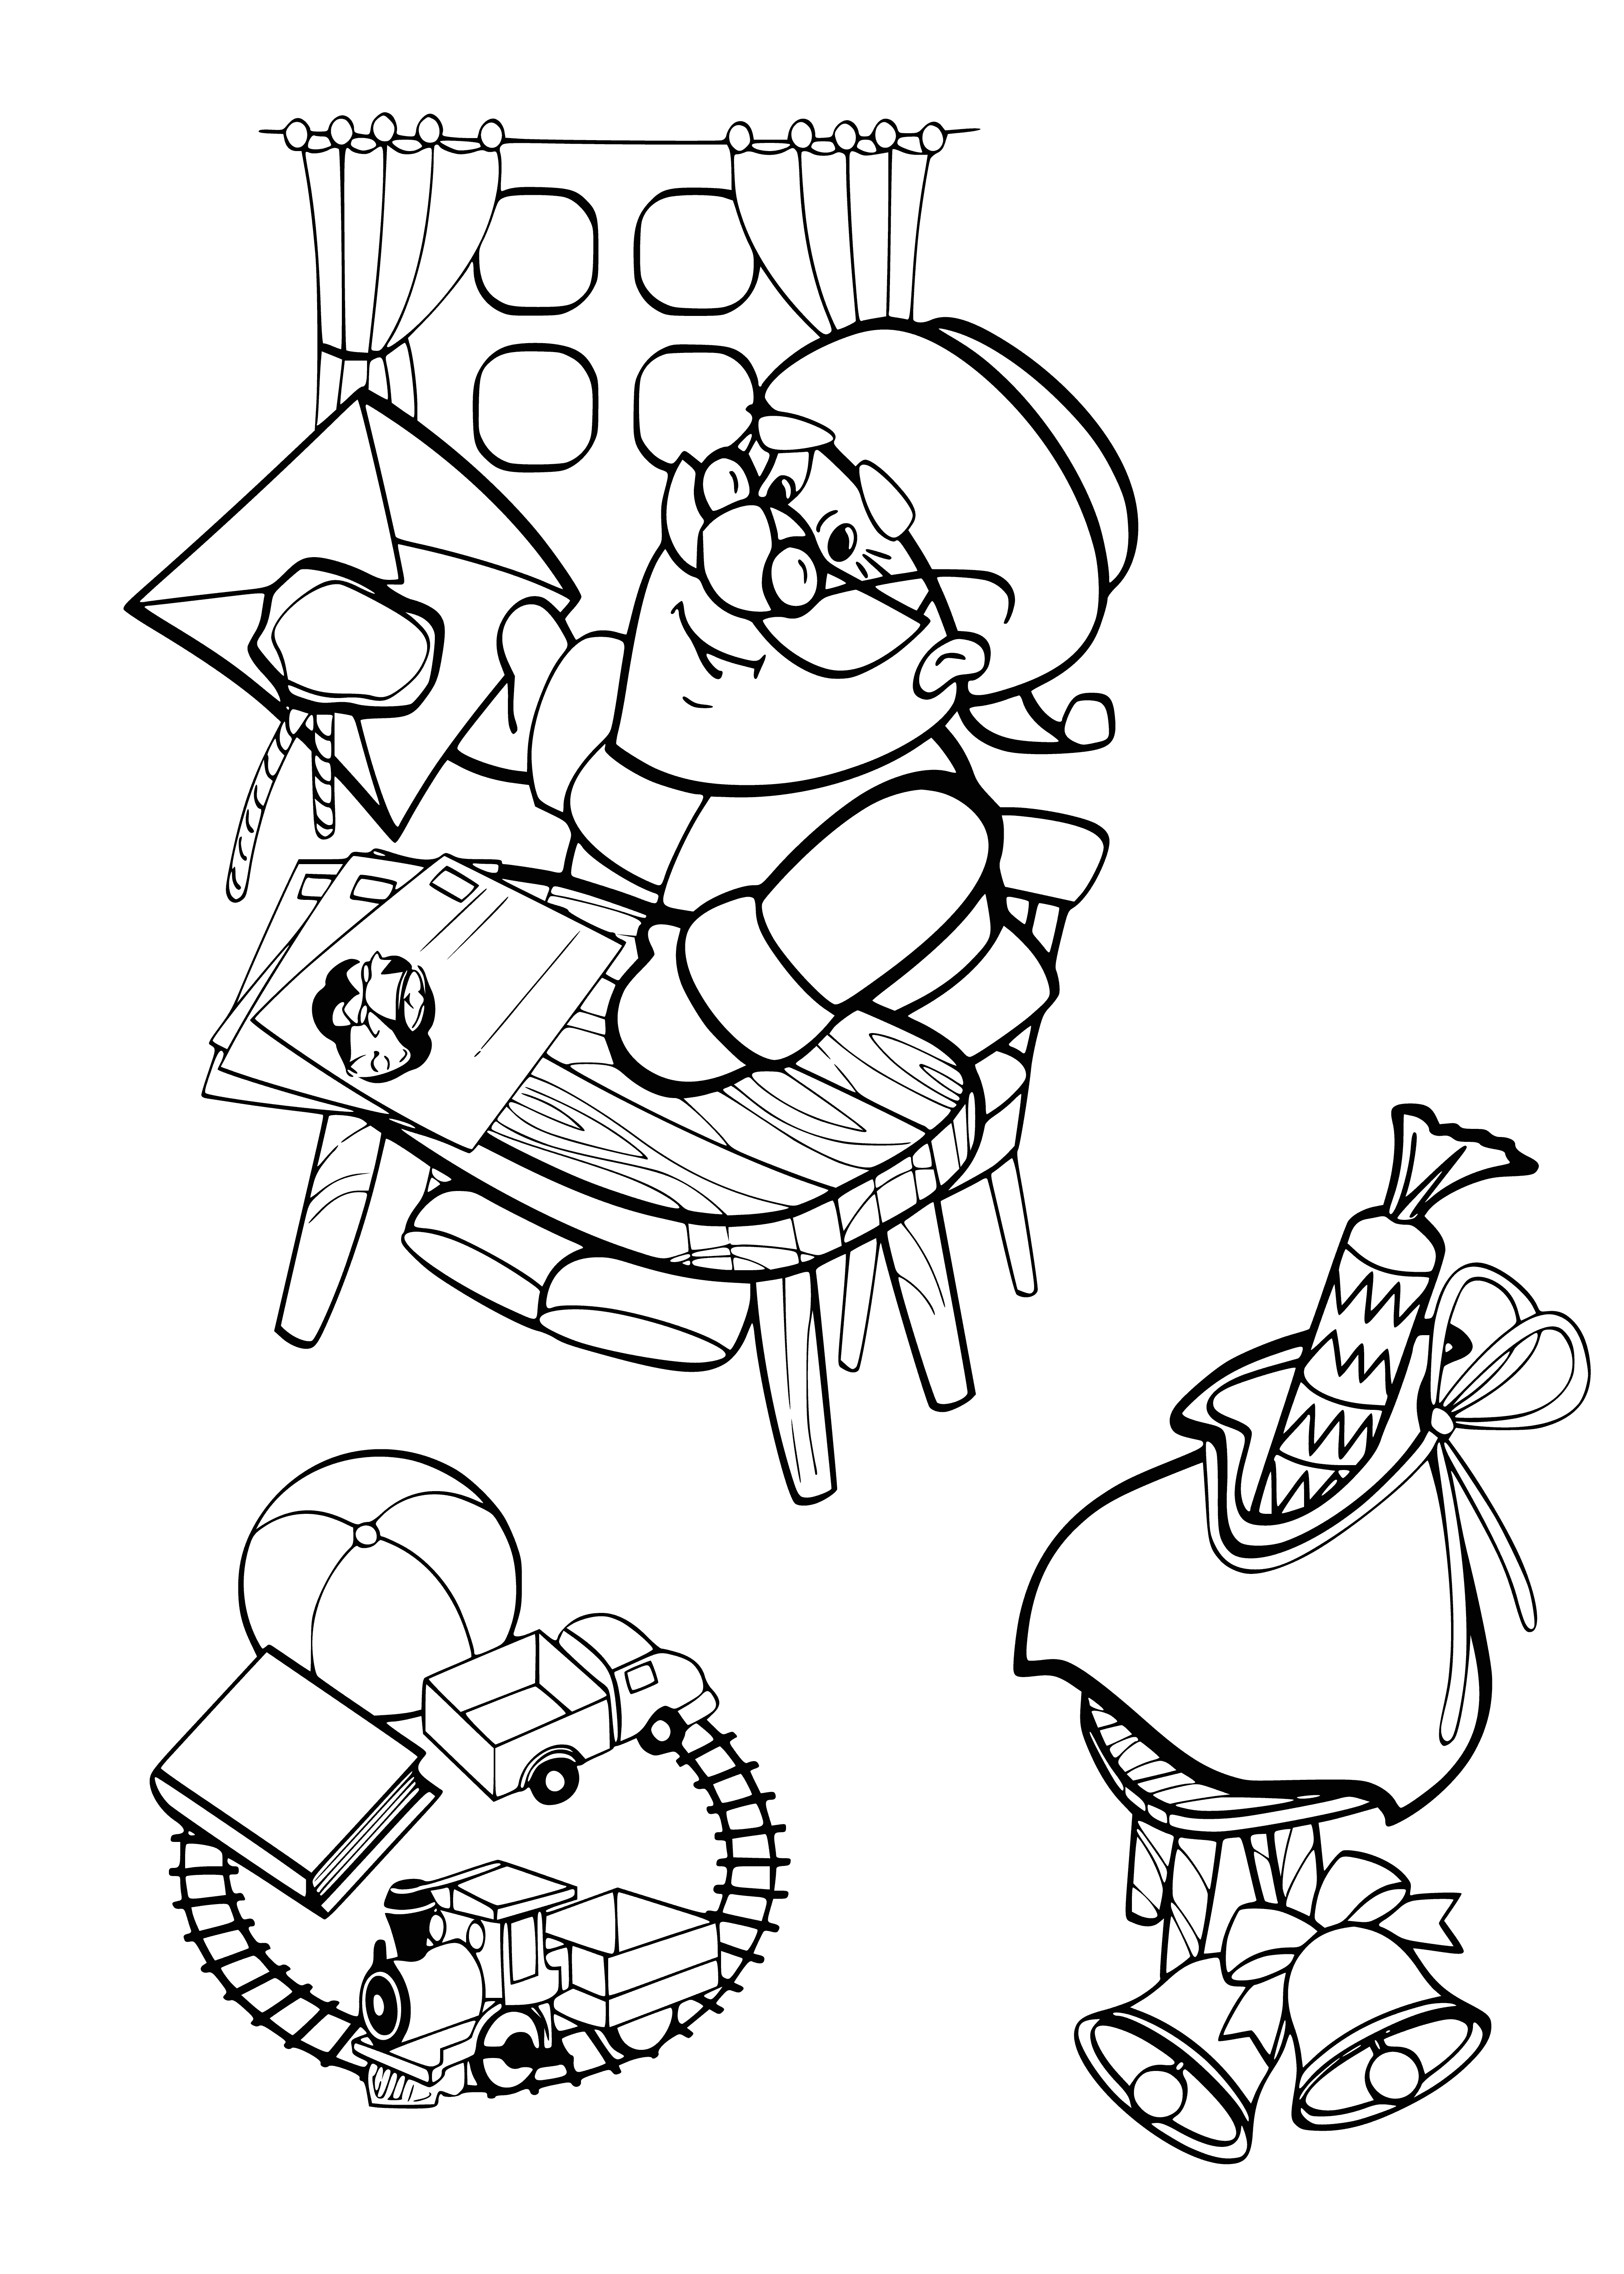 coloring page: Santa Claus is sorting gifts, looking for something specific with a concentrated expression.